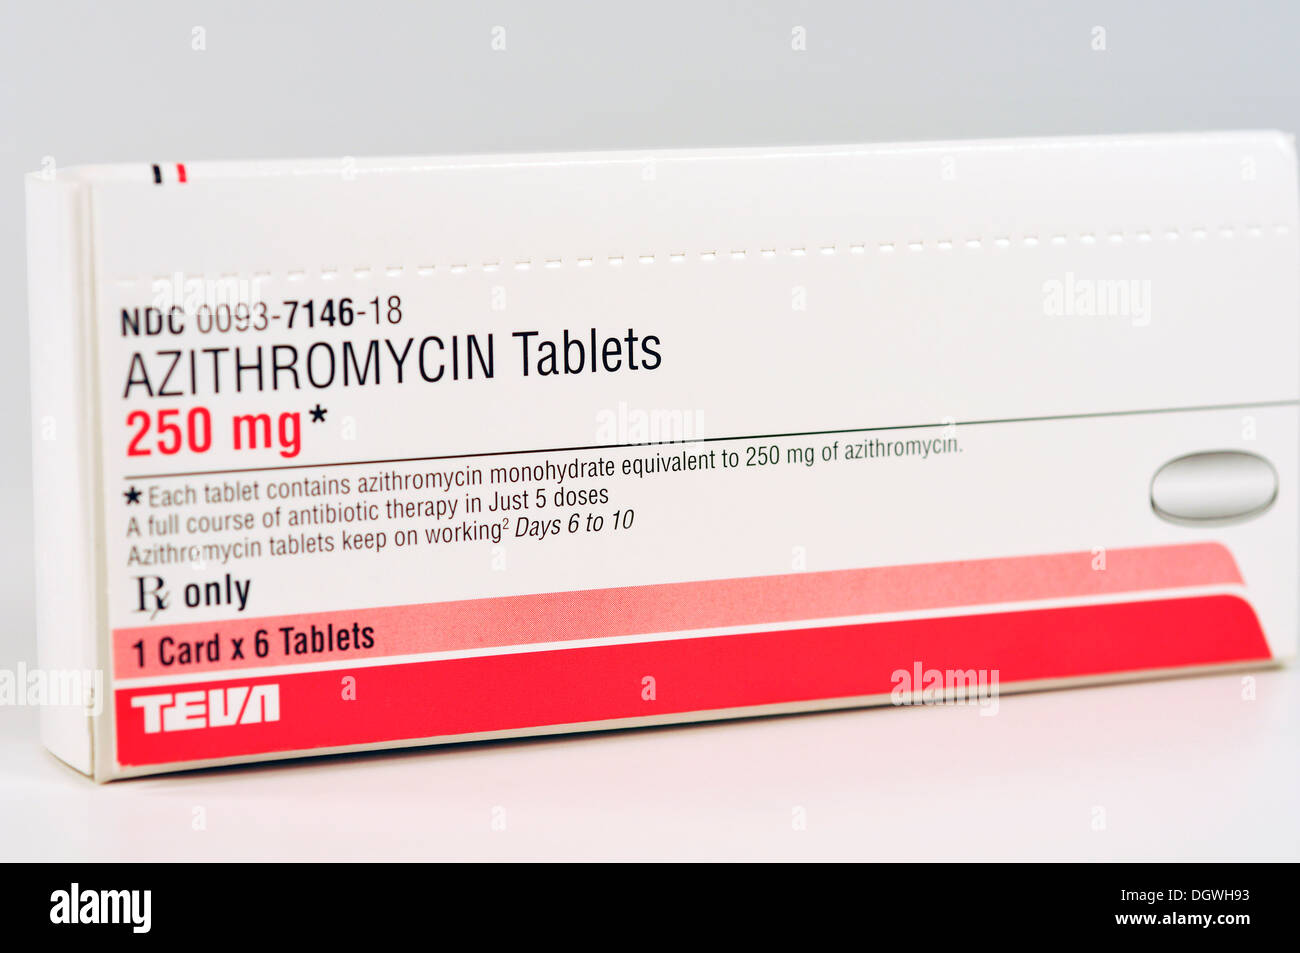 Zithromax price for two 500mg